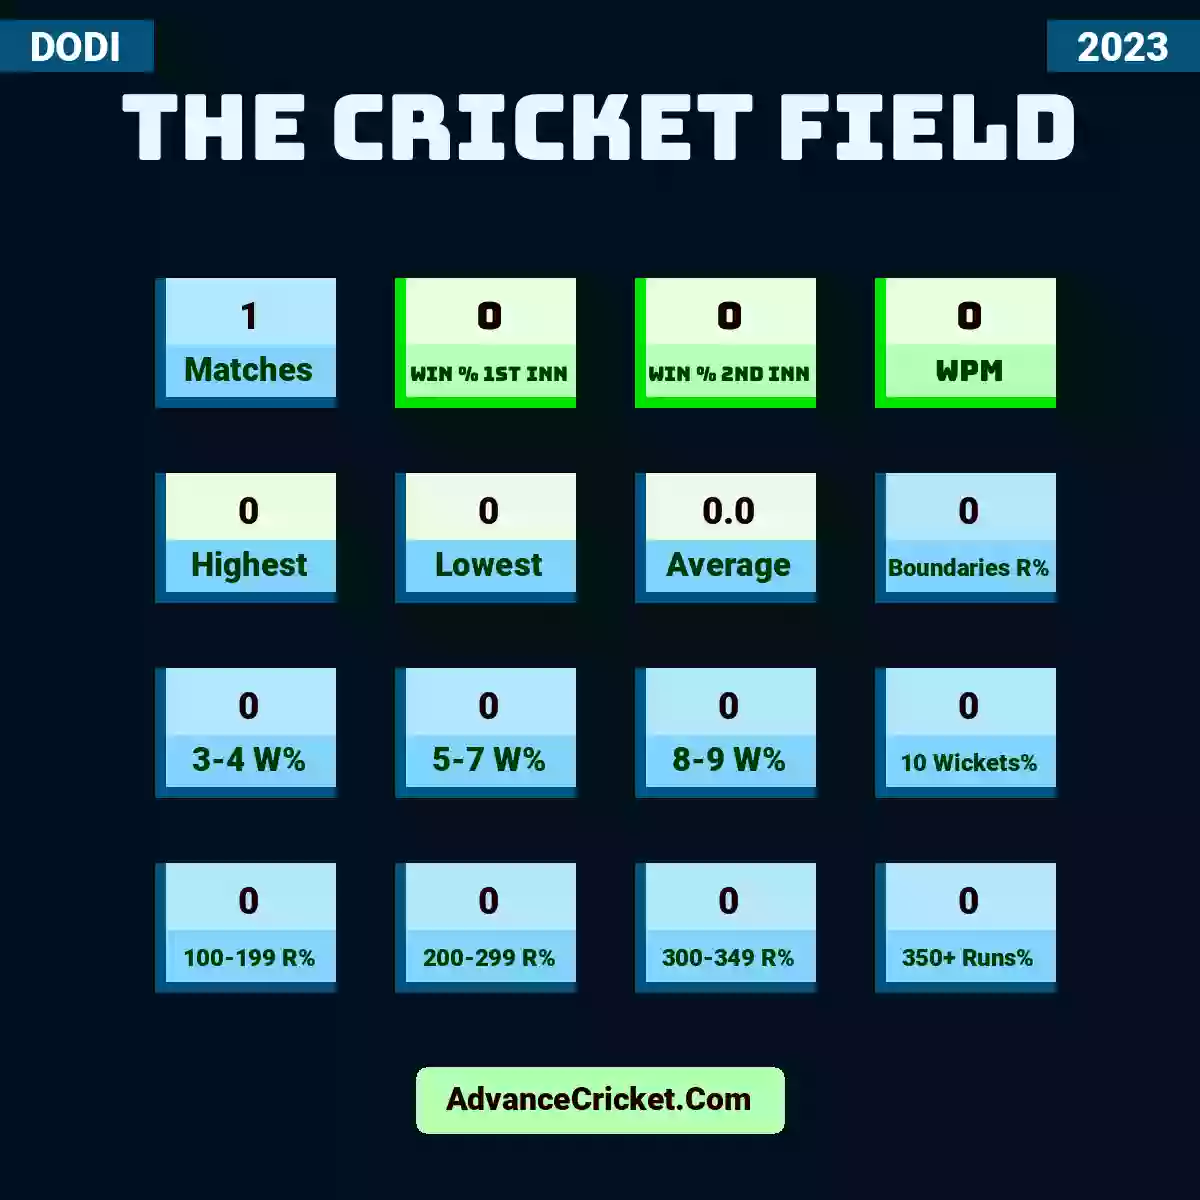 Image showing The Cricket Field with Matches: 1, Win % 1st Inn: 0, Win % 2nd Inn: 0, WPM: 0, Highest: 0, Lowest: 0, Average: 0.0, Boundaries R%: 0, 3-4 W%: 0, 5-7 W%: 0, 8-9 W%: 0, 10 Wickets%: 0, 100-199 R%: 0, 200-299 R%: 0, 300-349 R%: 0, 350+ Runs%: 0.